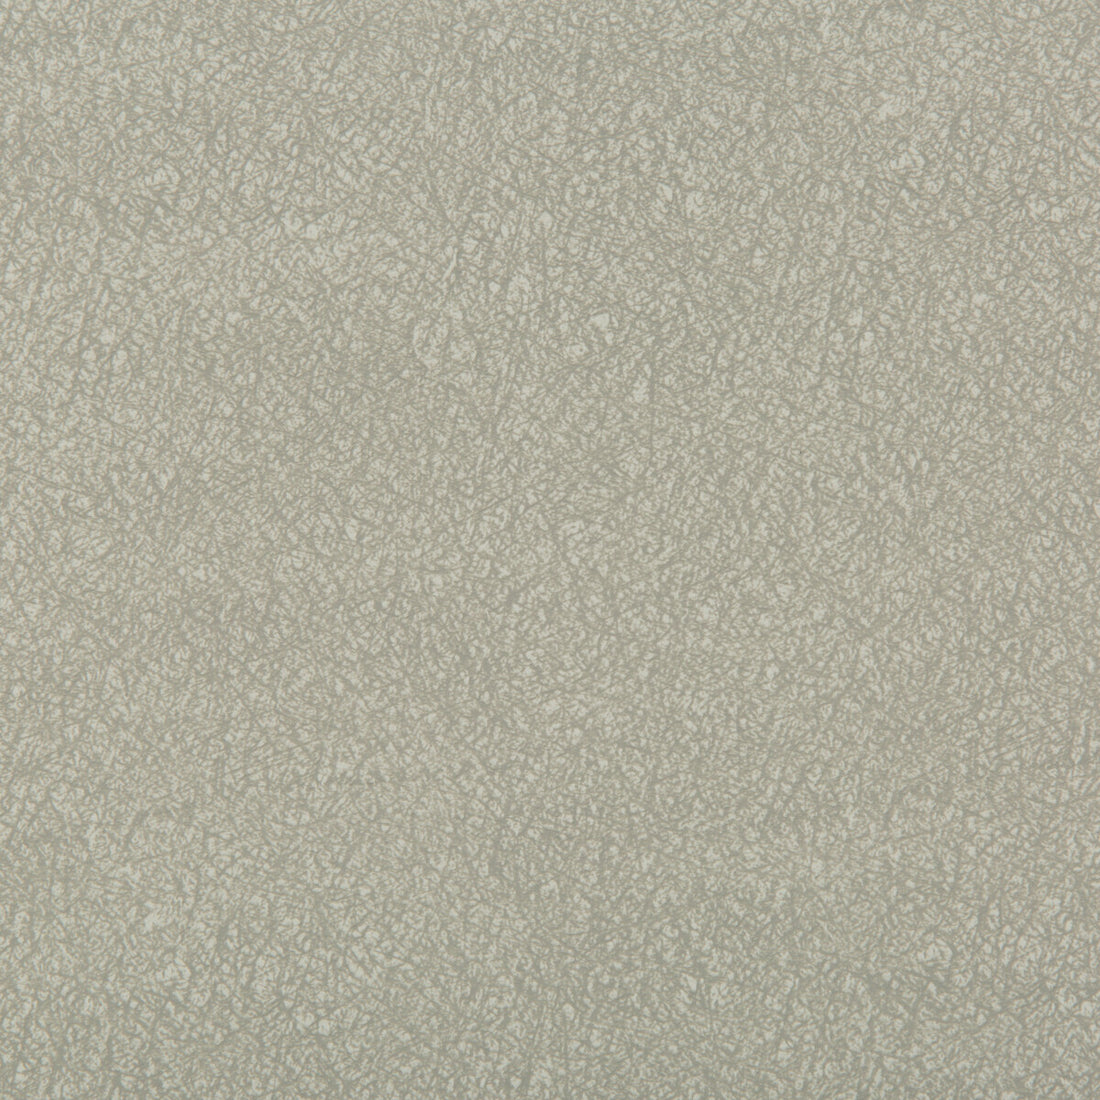 Ames fabric in granite color - pattern AMES.11.0 - by Kravet Contract